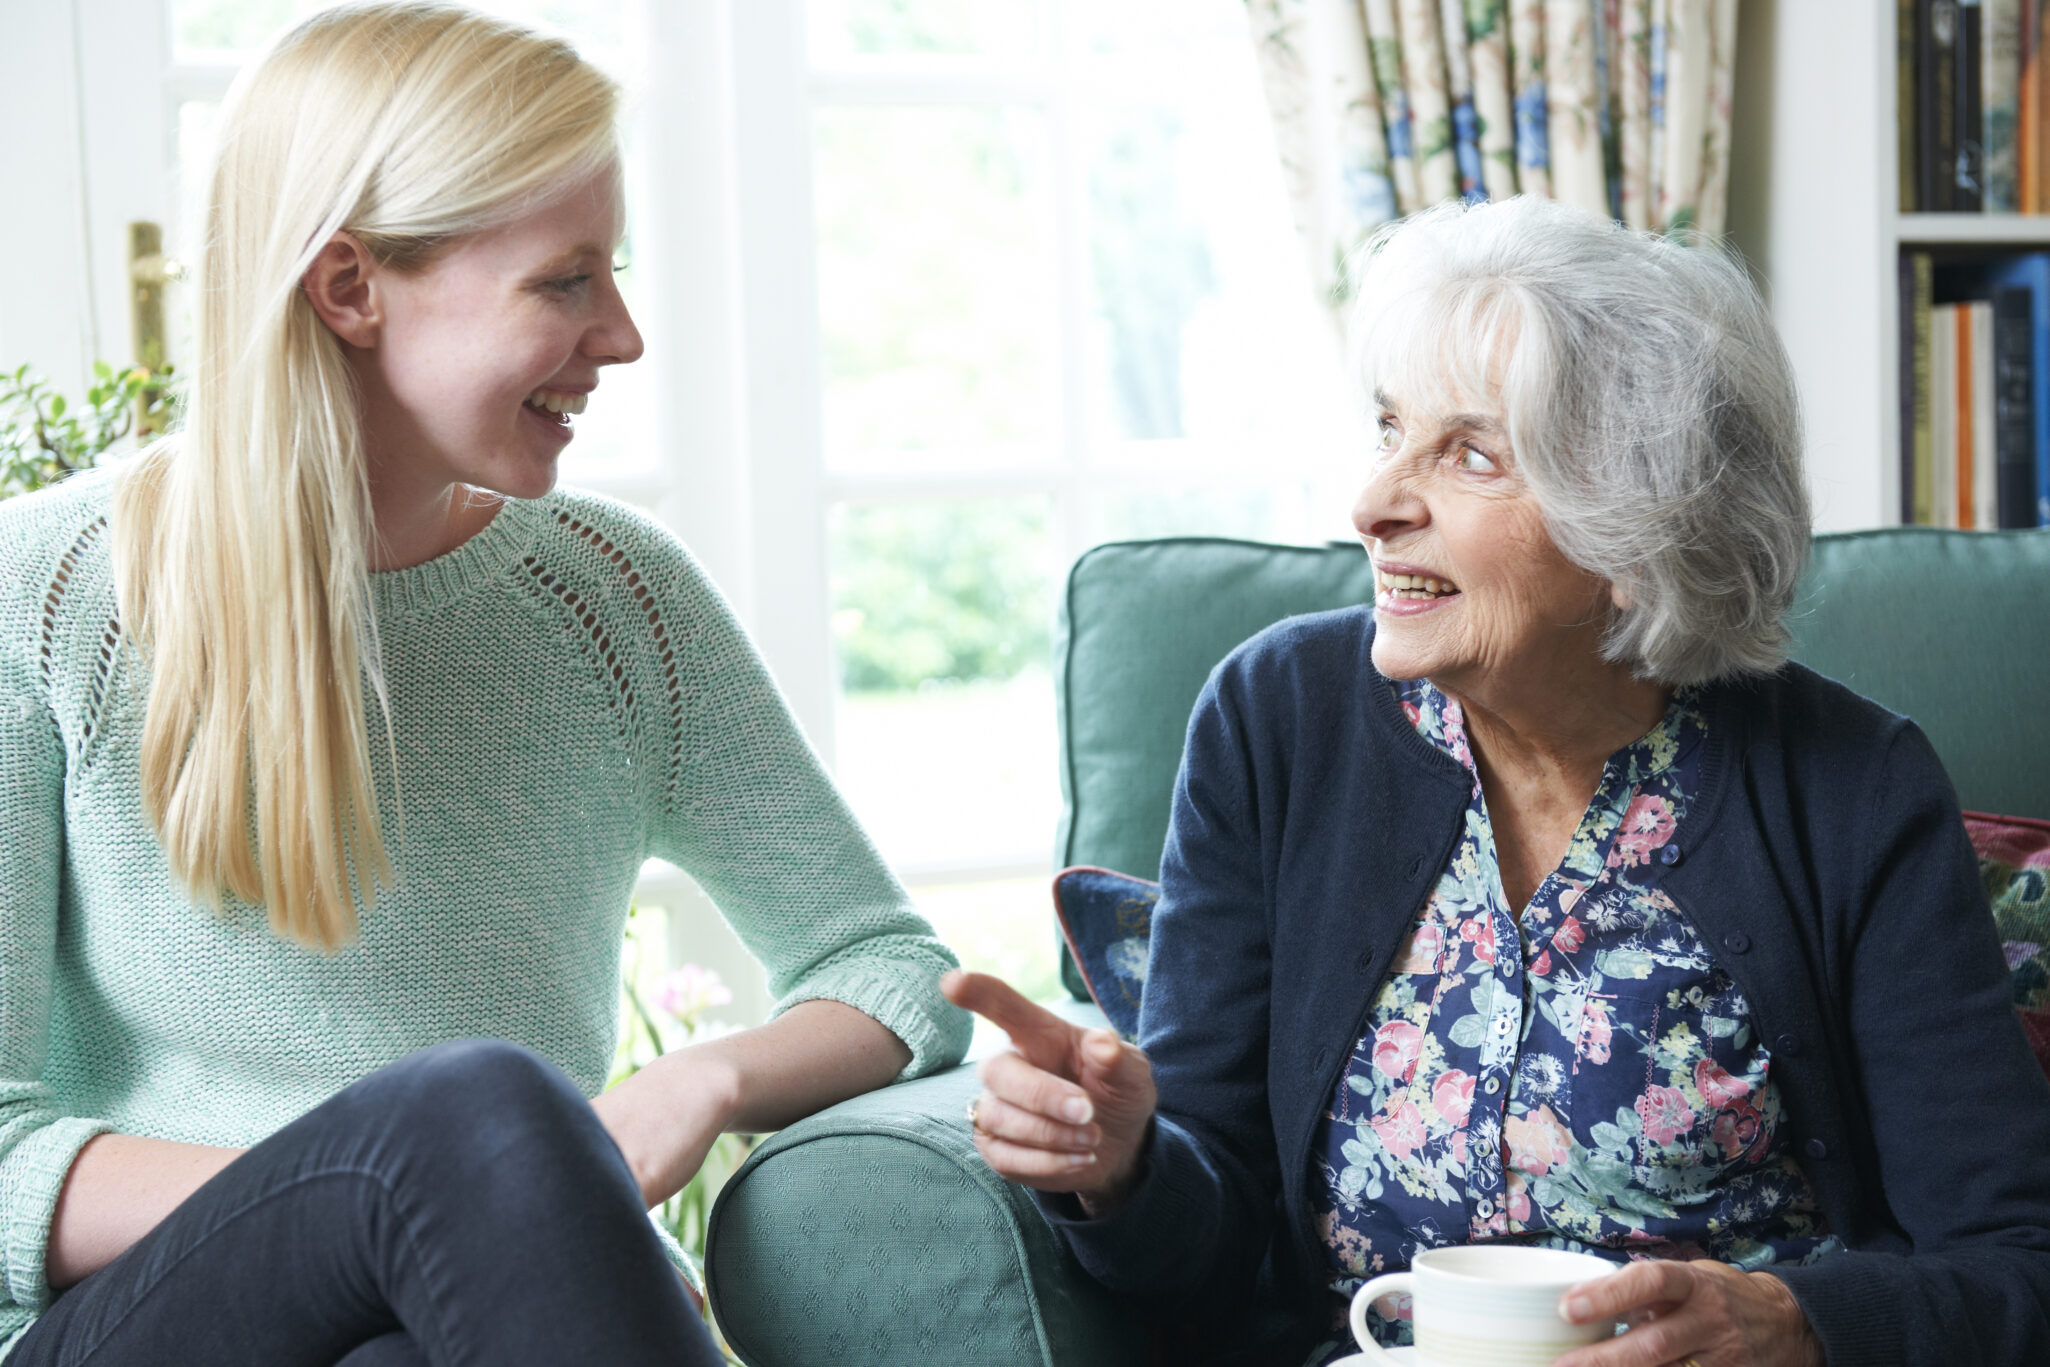 A senior woman visits with a younger blonde woman.